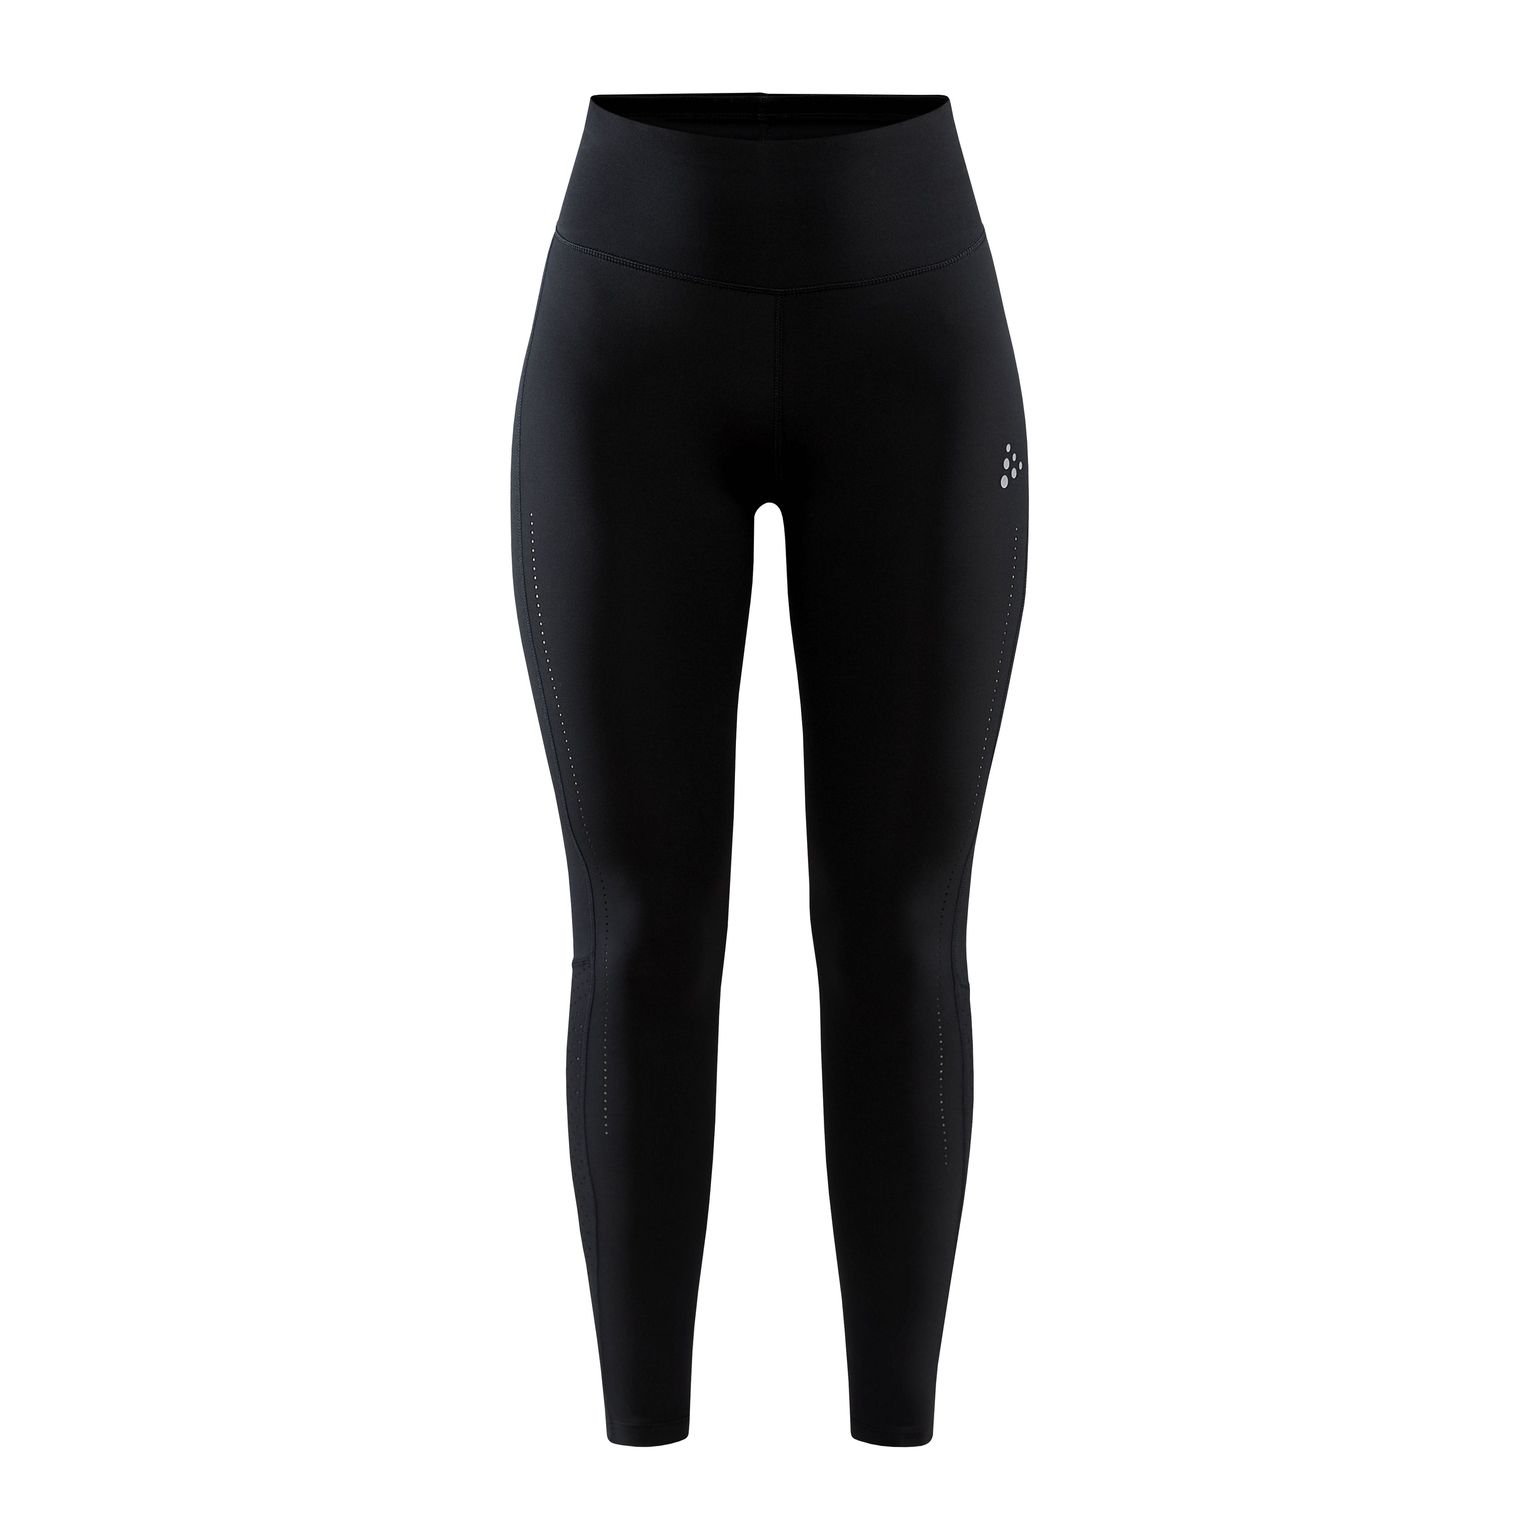 Women's Adv Charge Perforated Tights Black